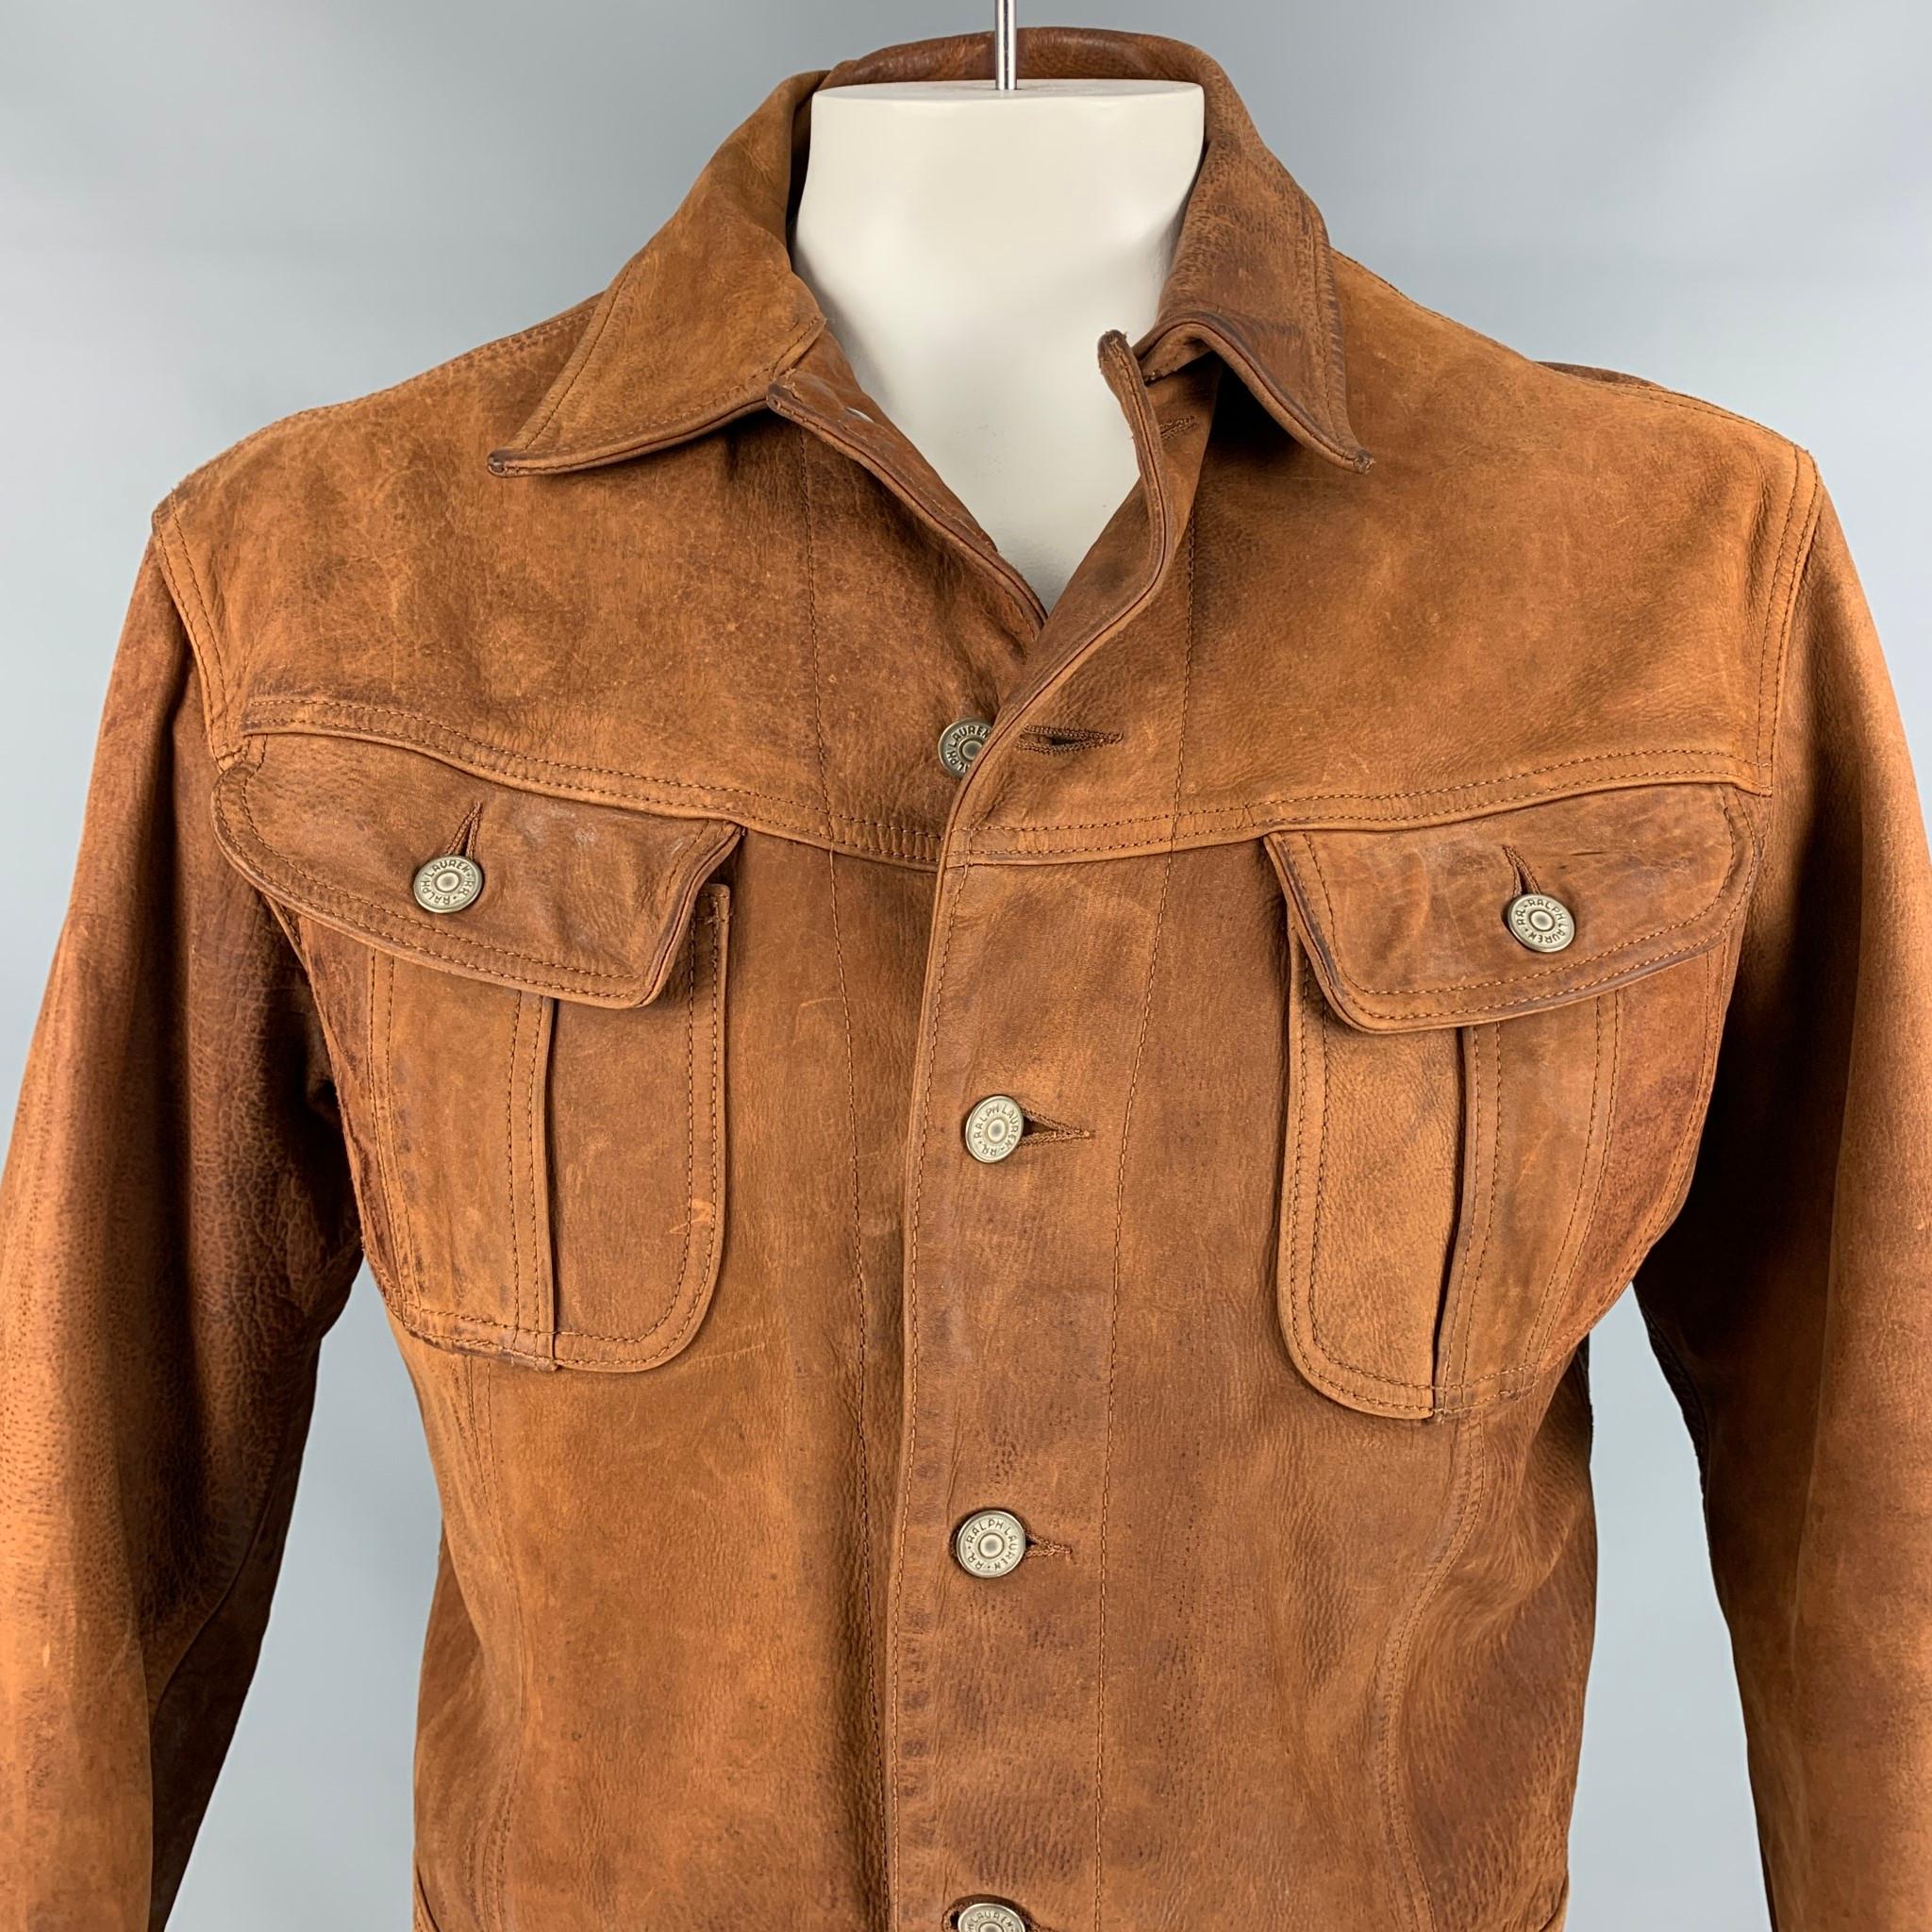 RRL by RALPH LAUREN jacket comes in a brown distressed leather with a full liner featuring a western style, front pockets, and a buttoned closure. 

Very Good Pre-Owned Condition.
Marked: L
Original Retail Price: $1,800.00

Measurements:

Shoulder: